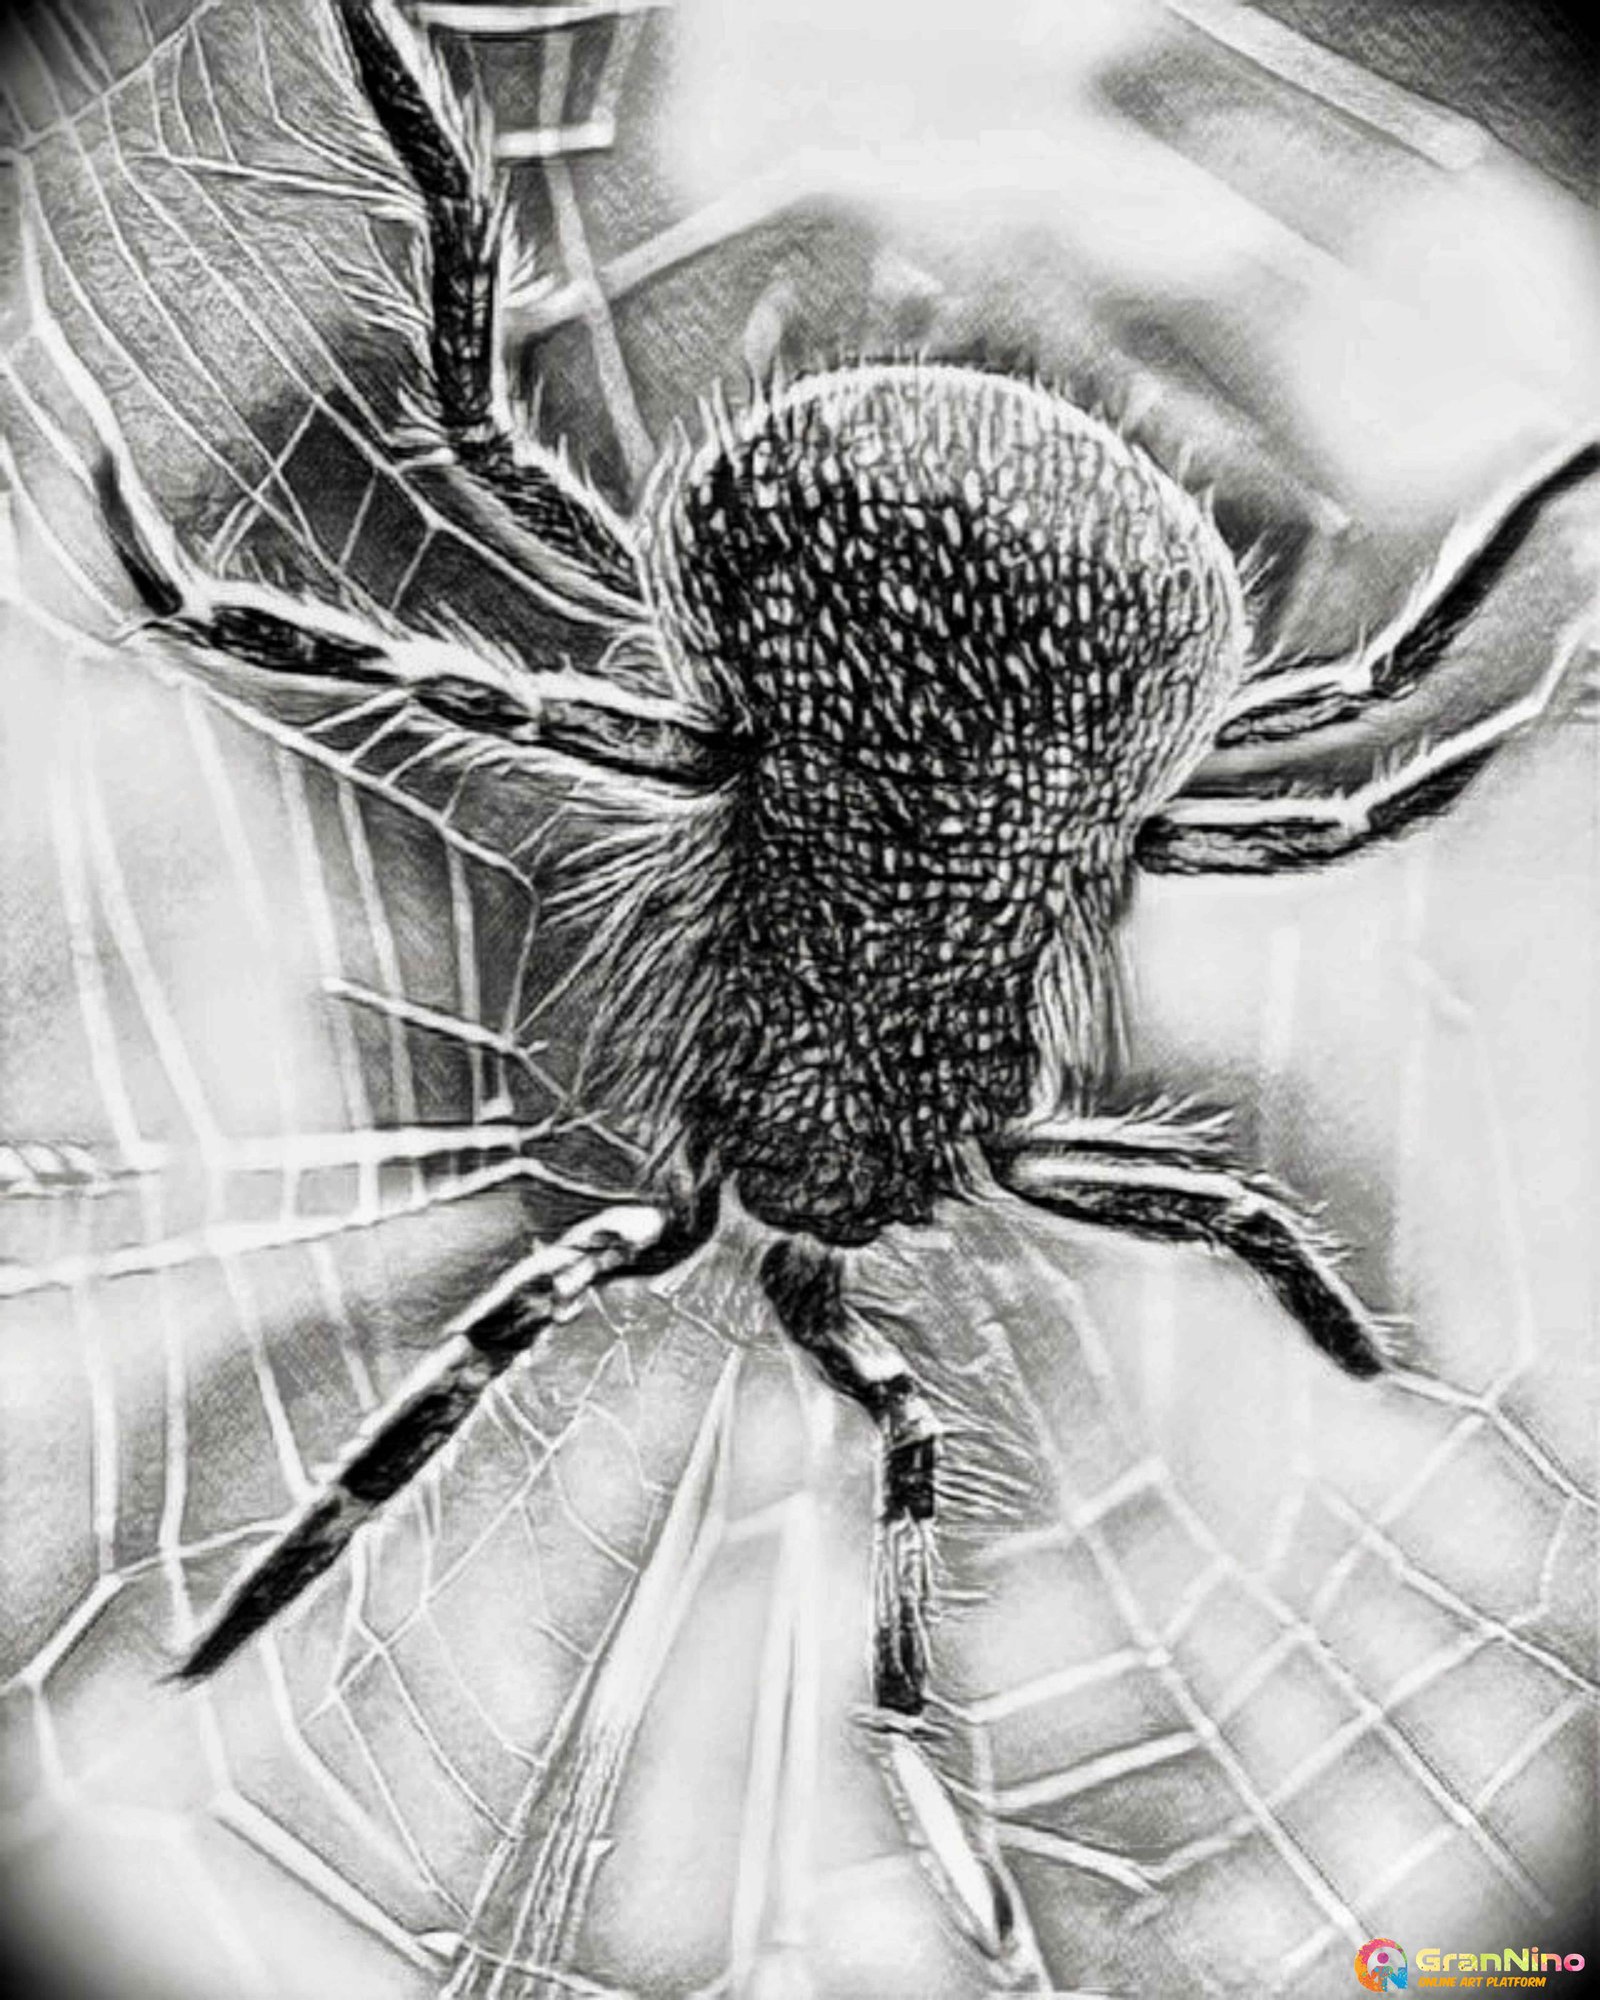 Painting Of Spider In A Web In Digital Art Size 160 Sq Cm